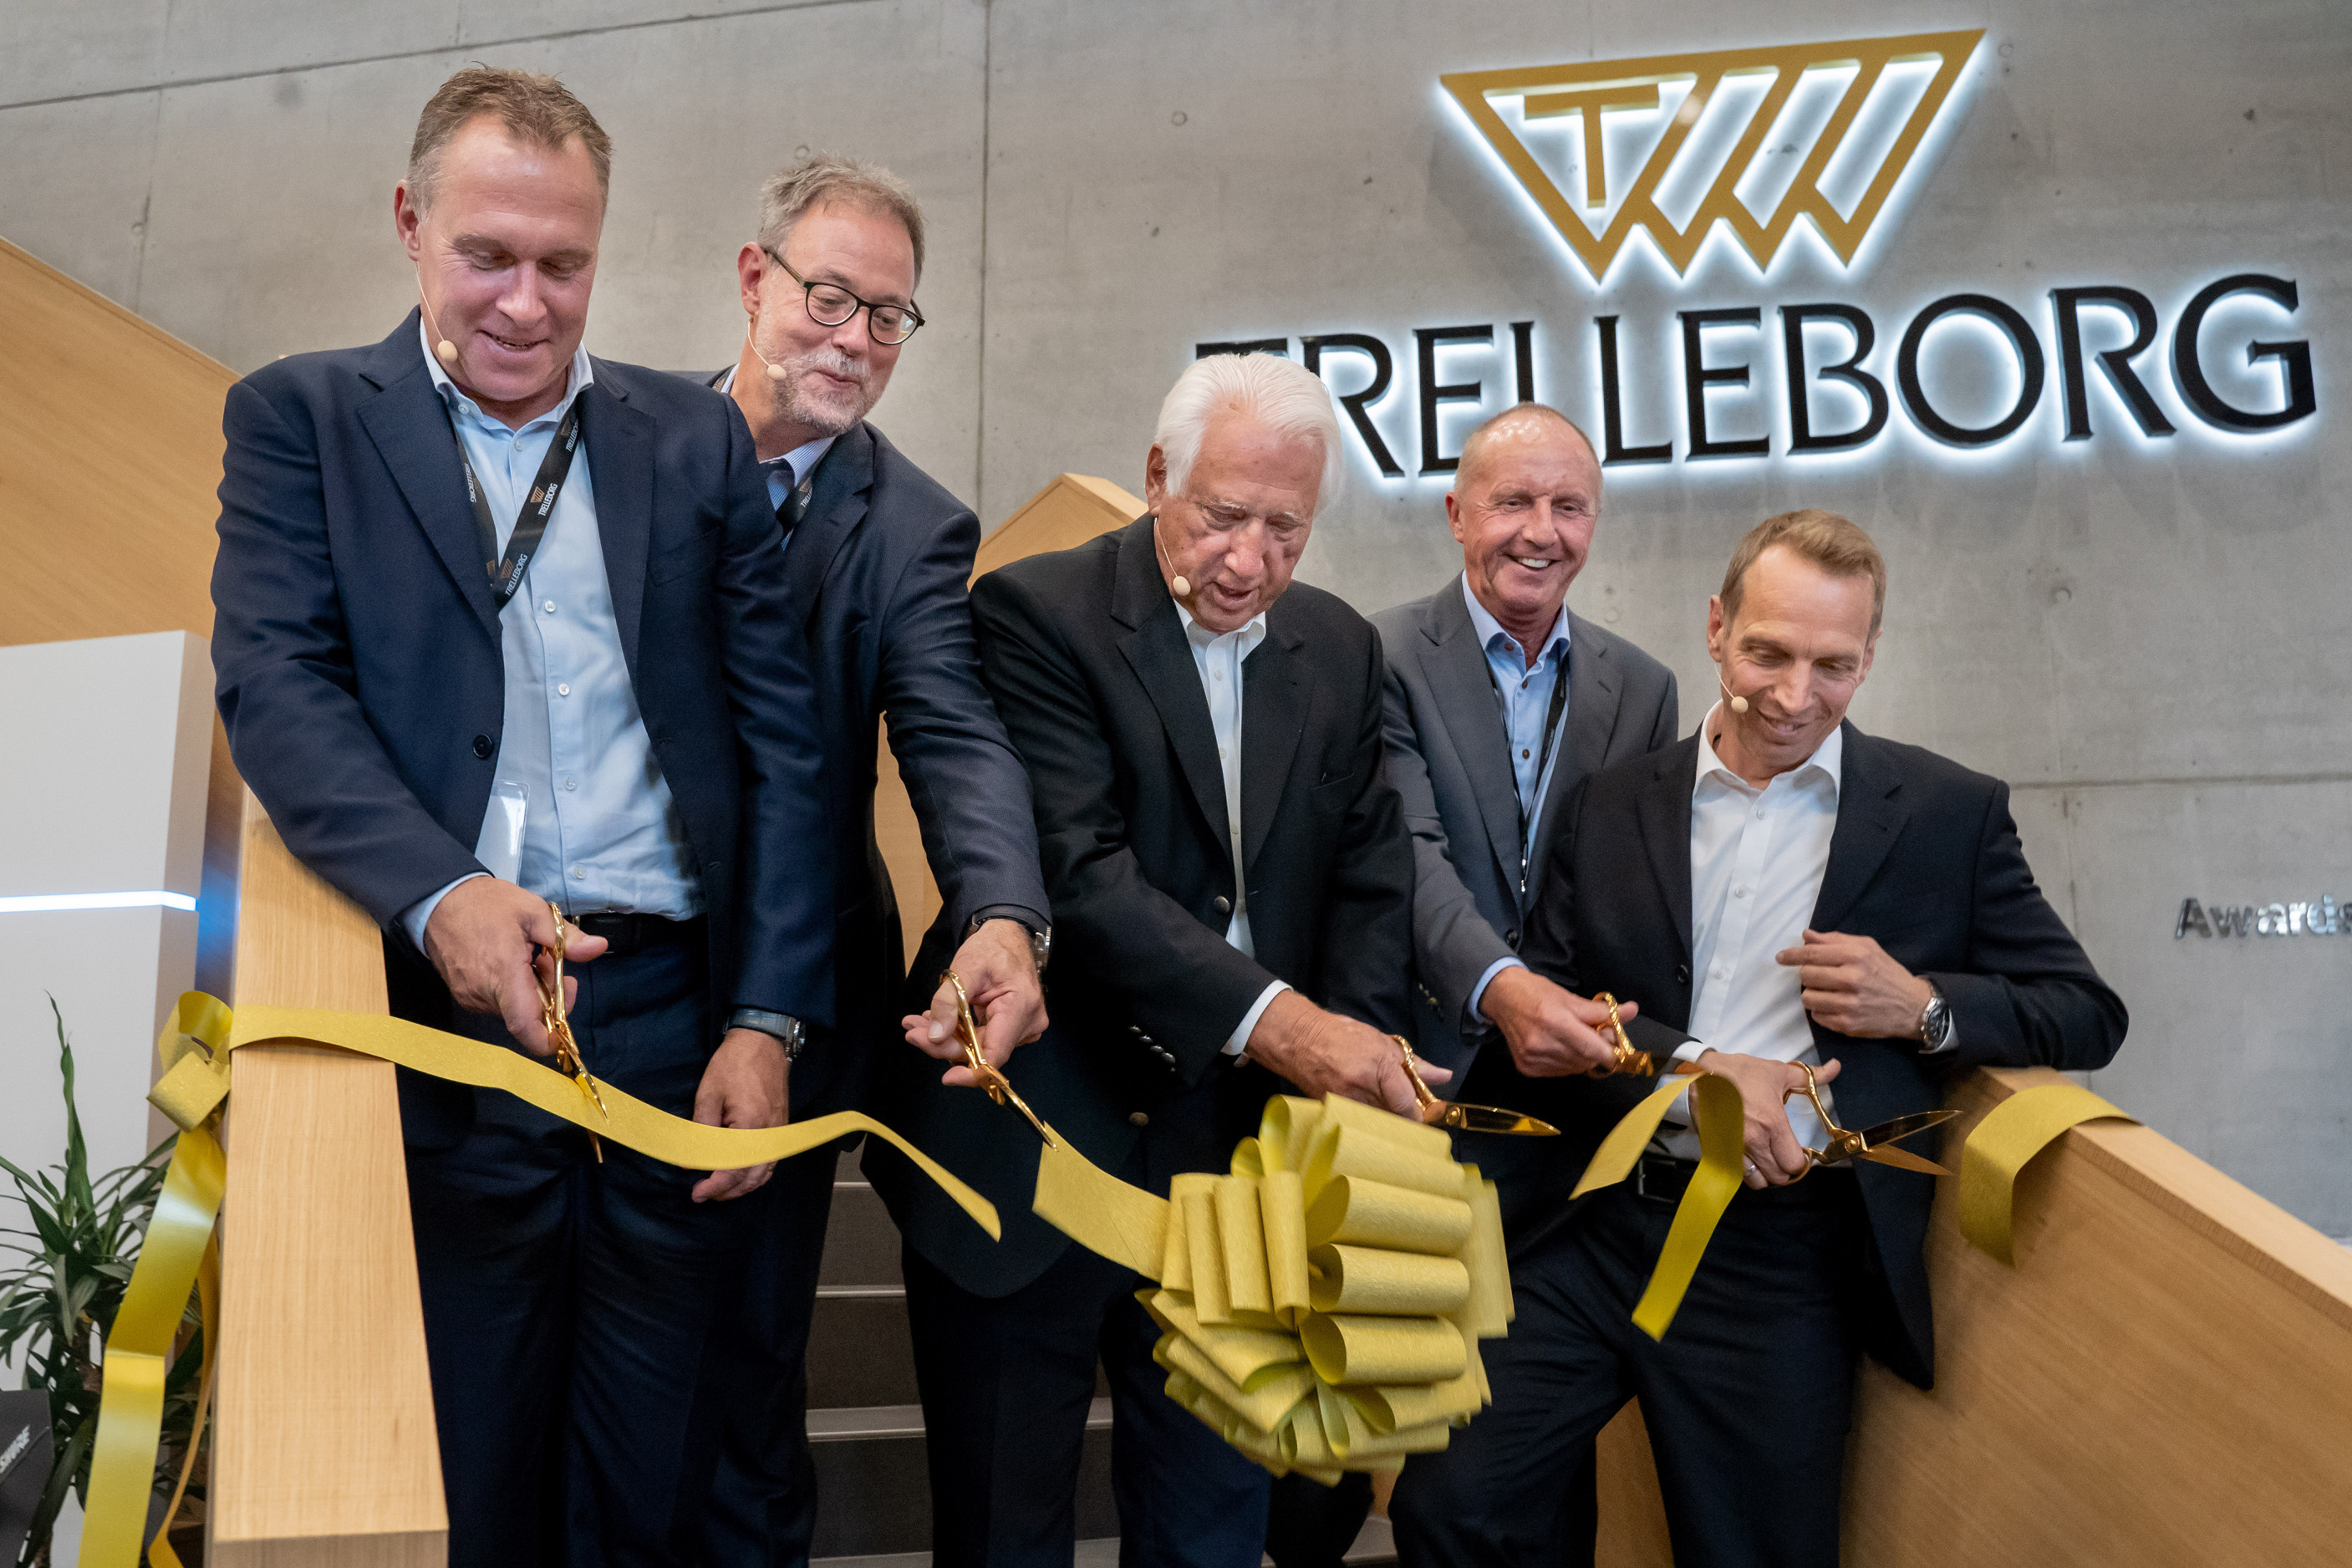 Left to right: Peter Nilsson, Peter Hahn, Horst Buelow, Claus Barsoe and Carsten Stehle.